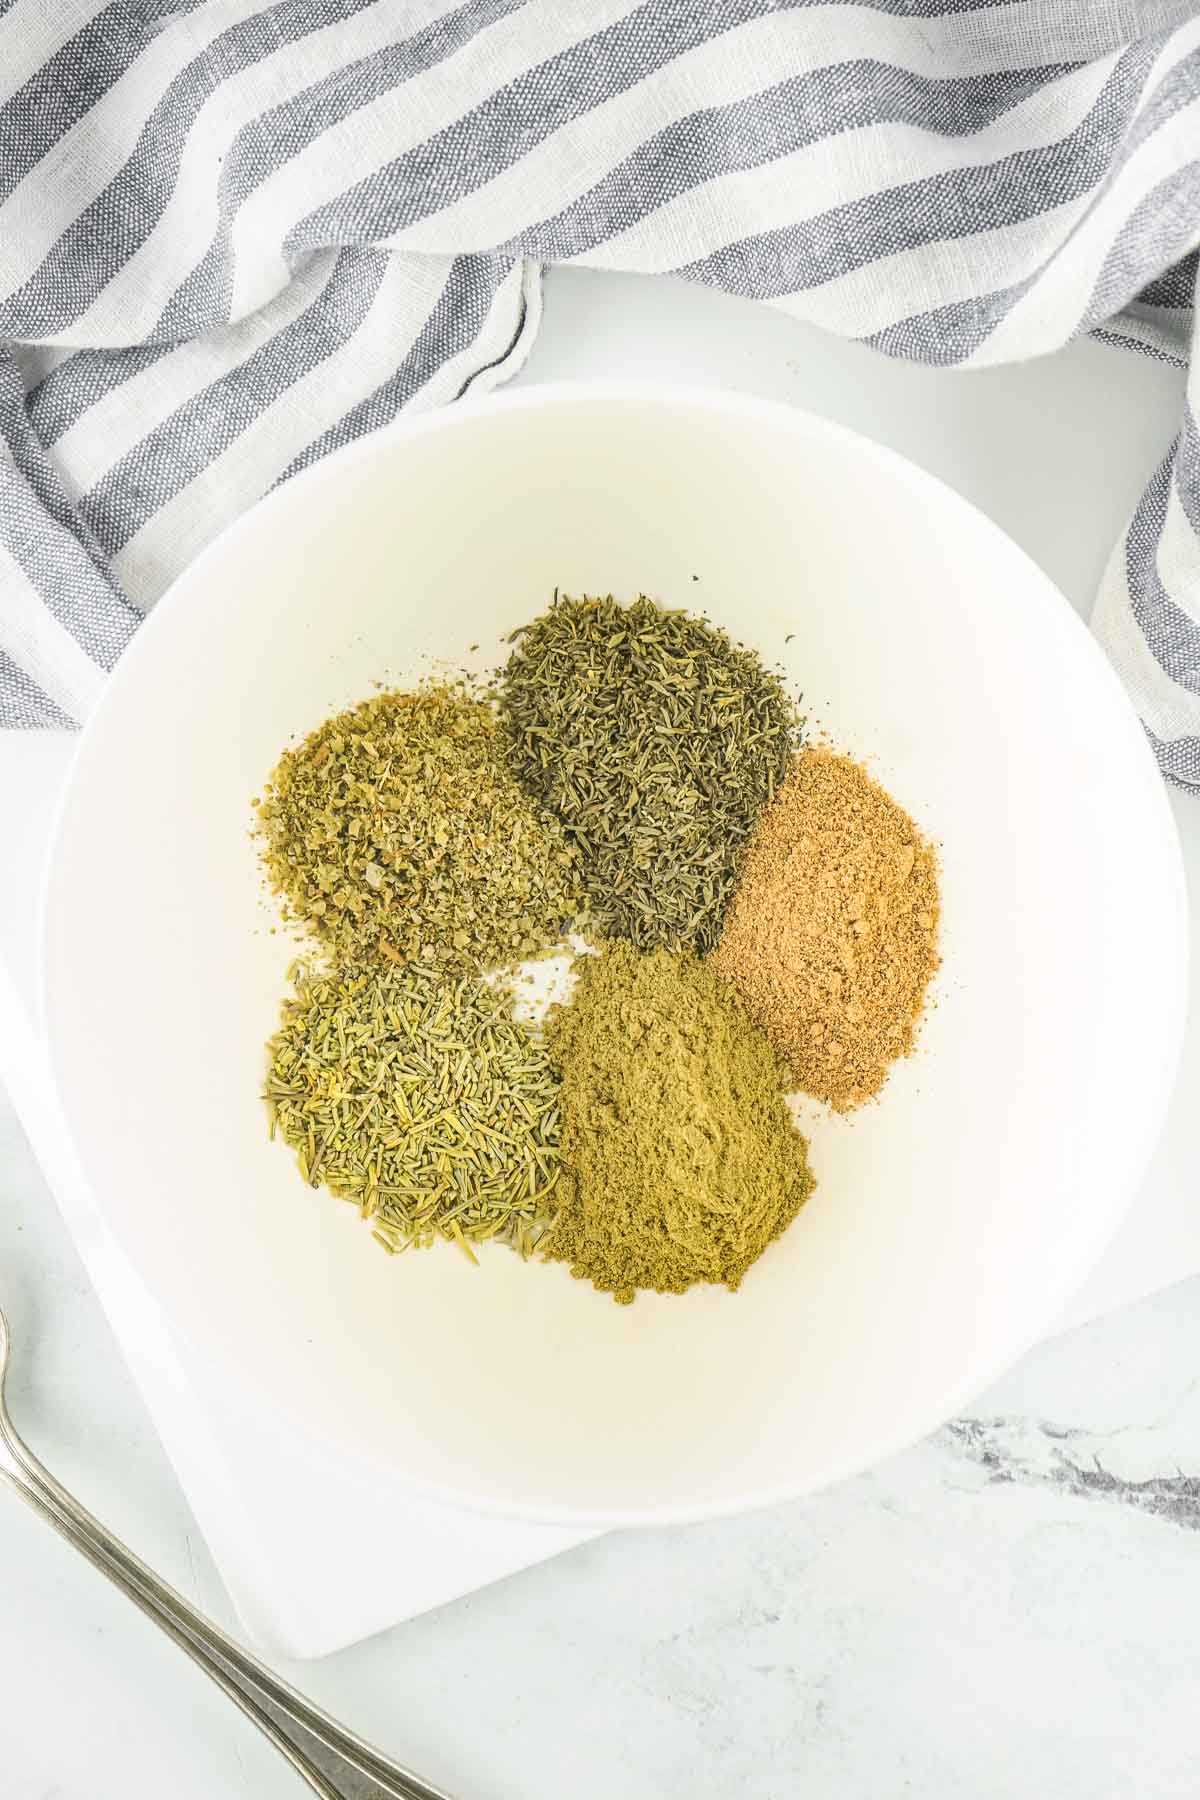 Easy Homemade Poultry Seasoning - To Simply Inspire